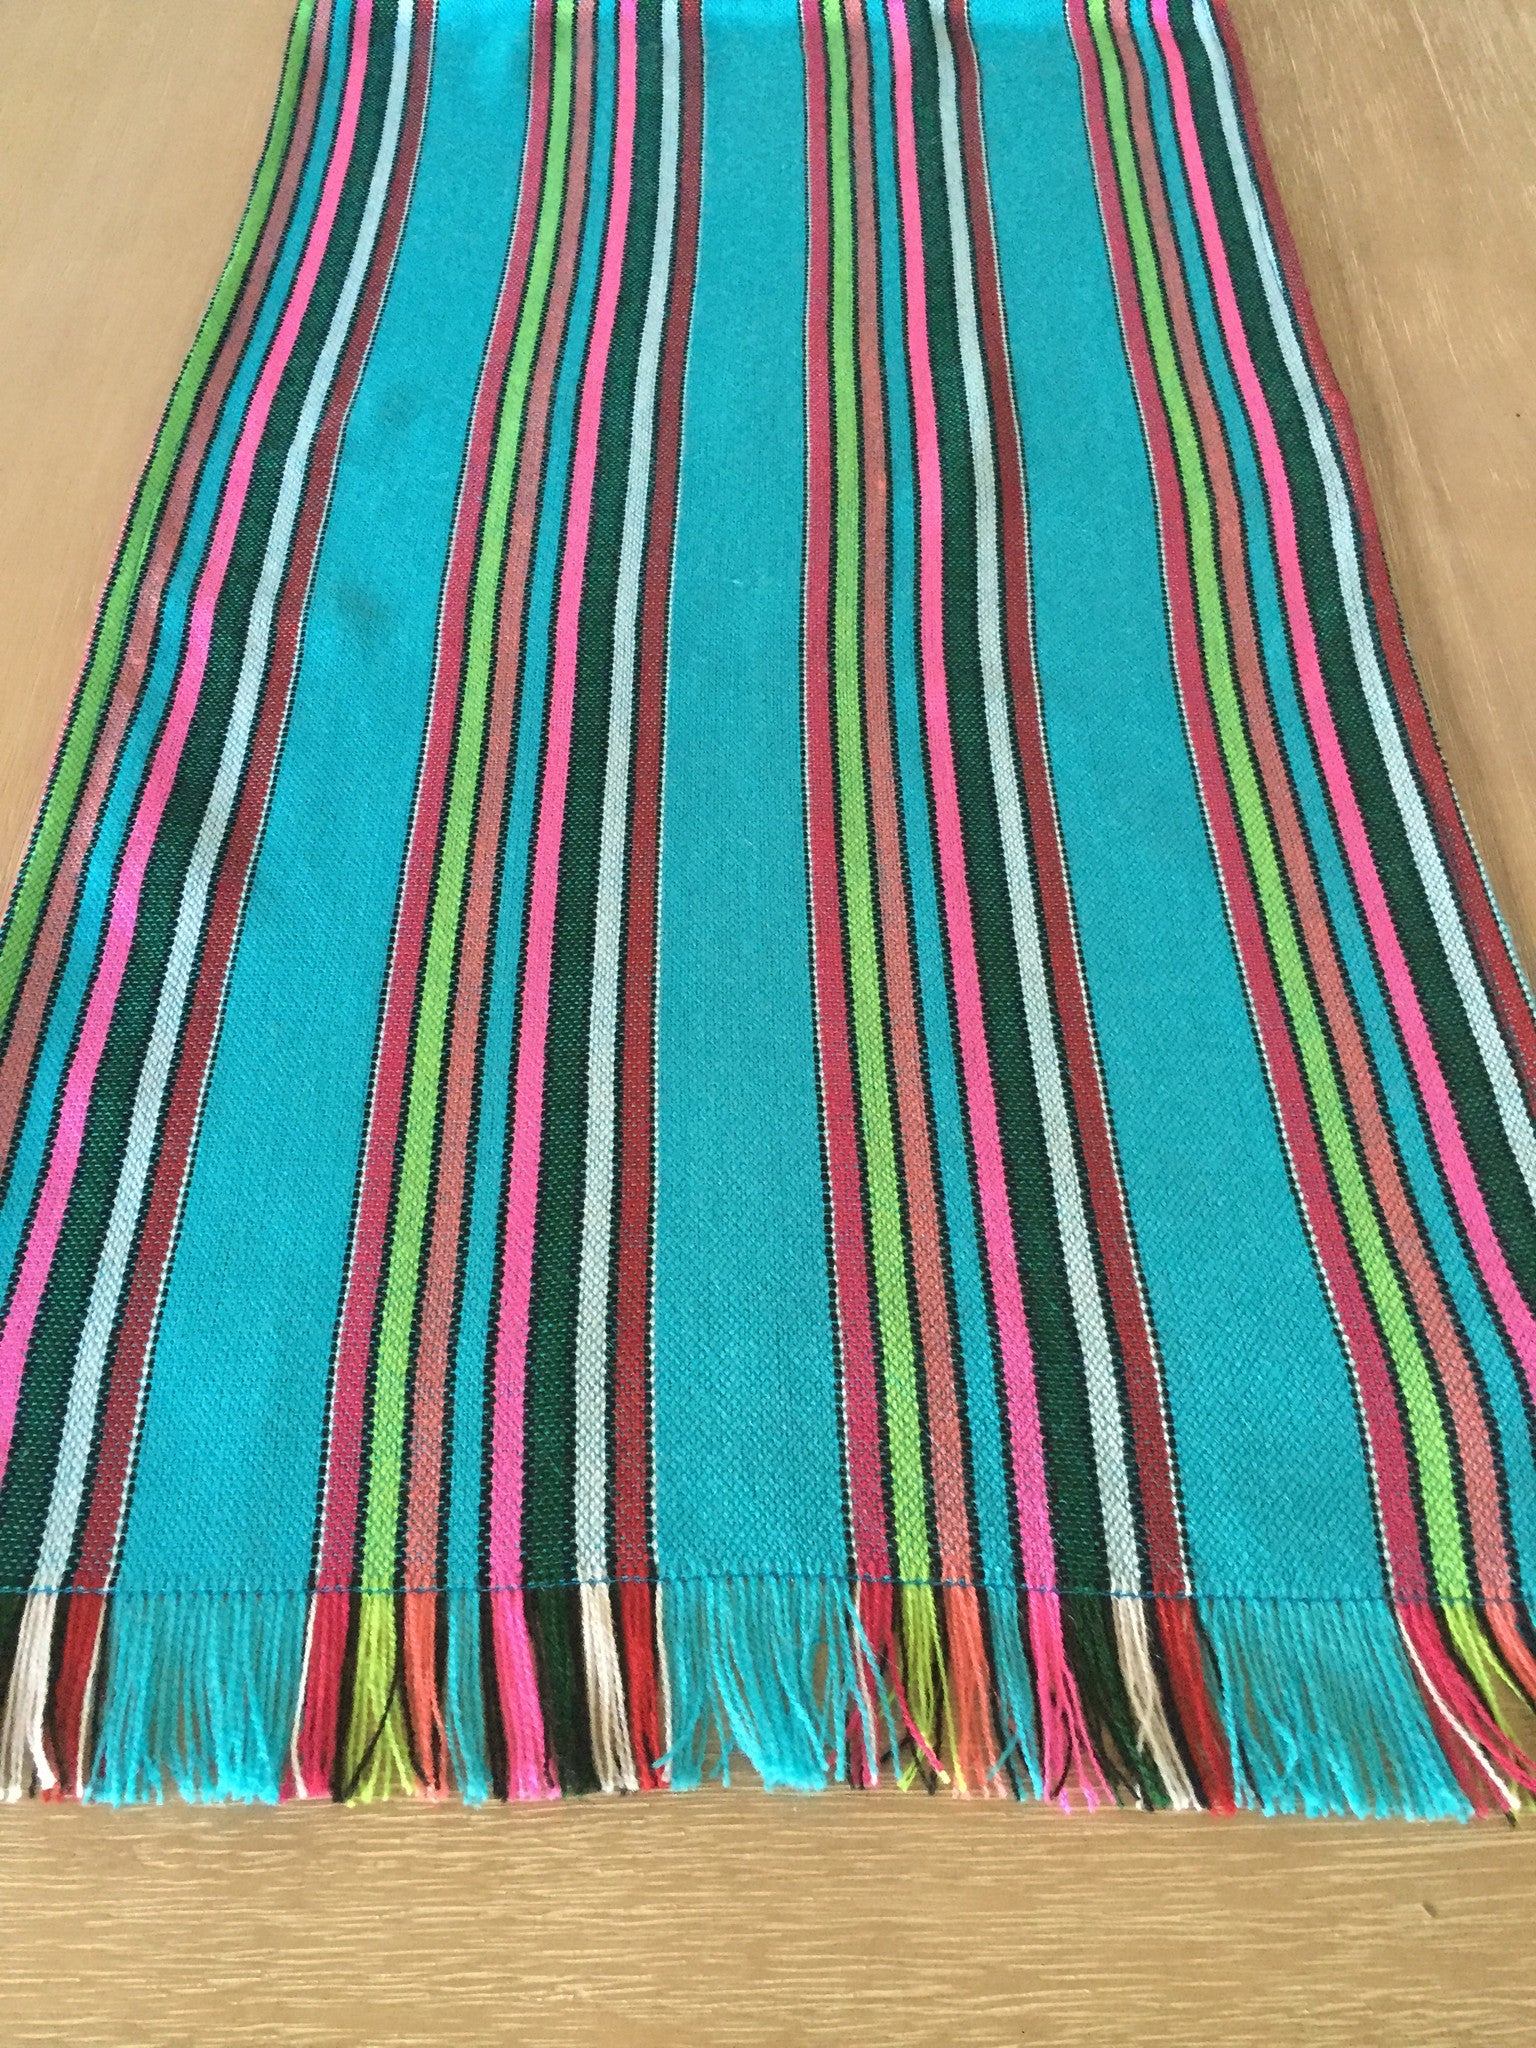 Mexican Fabric Table Runner Colorful Teal Stripes - MesaChic - 4